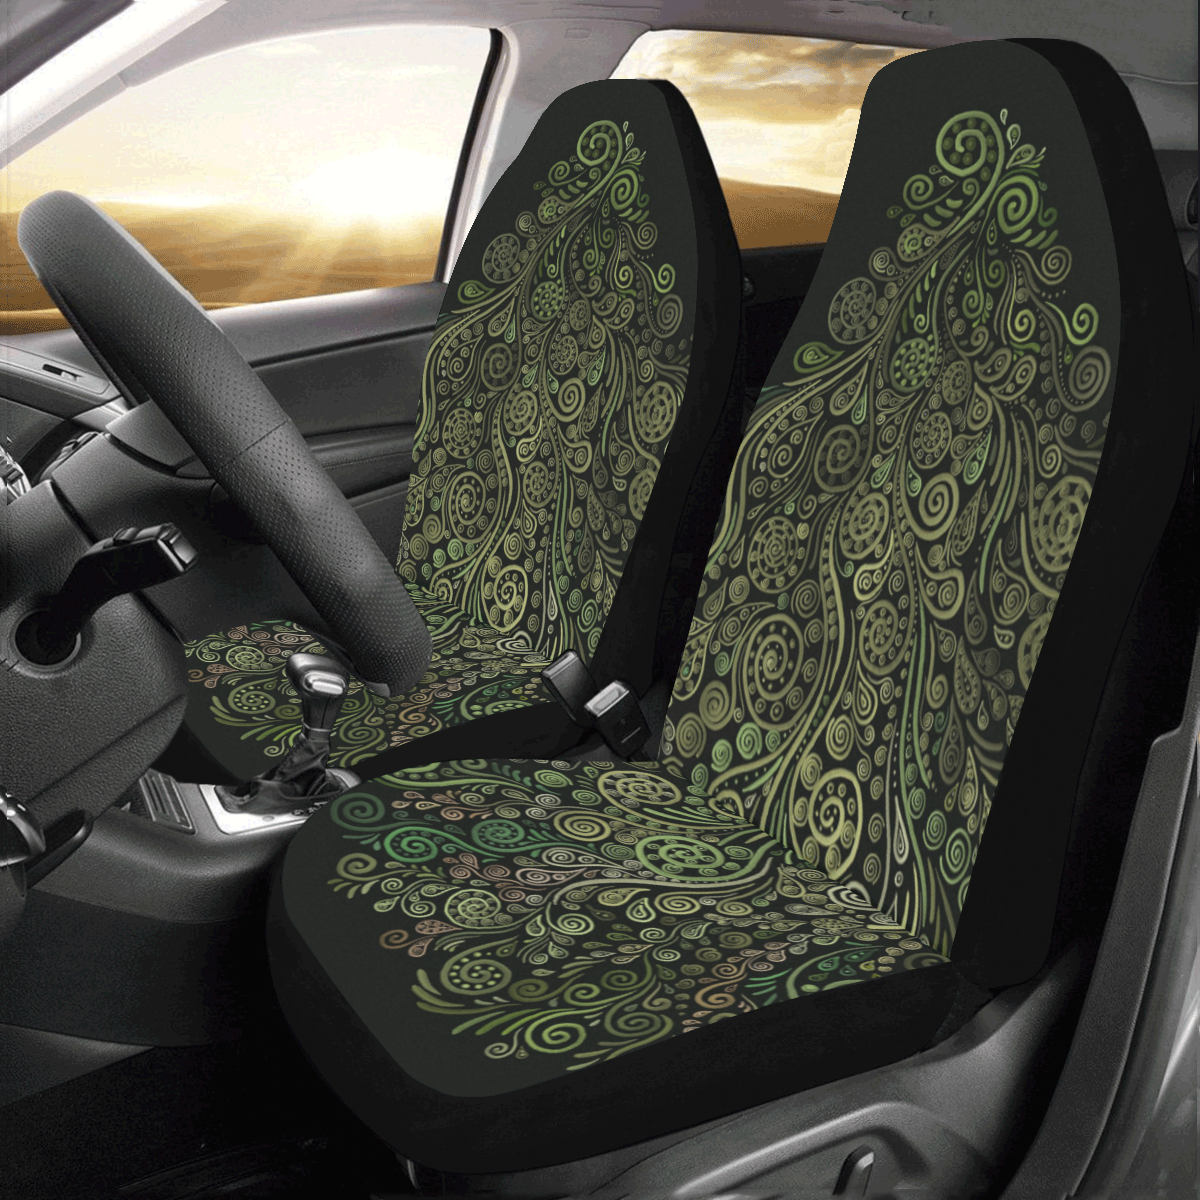 3D Psychedelic Fantasy Tree, green on black Car Seat Covers (Set of 2)